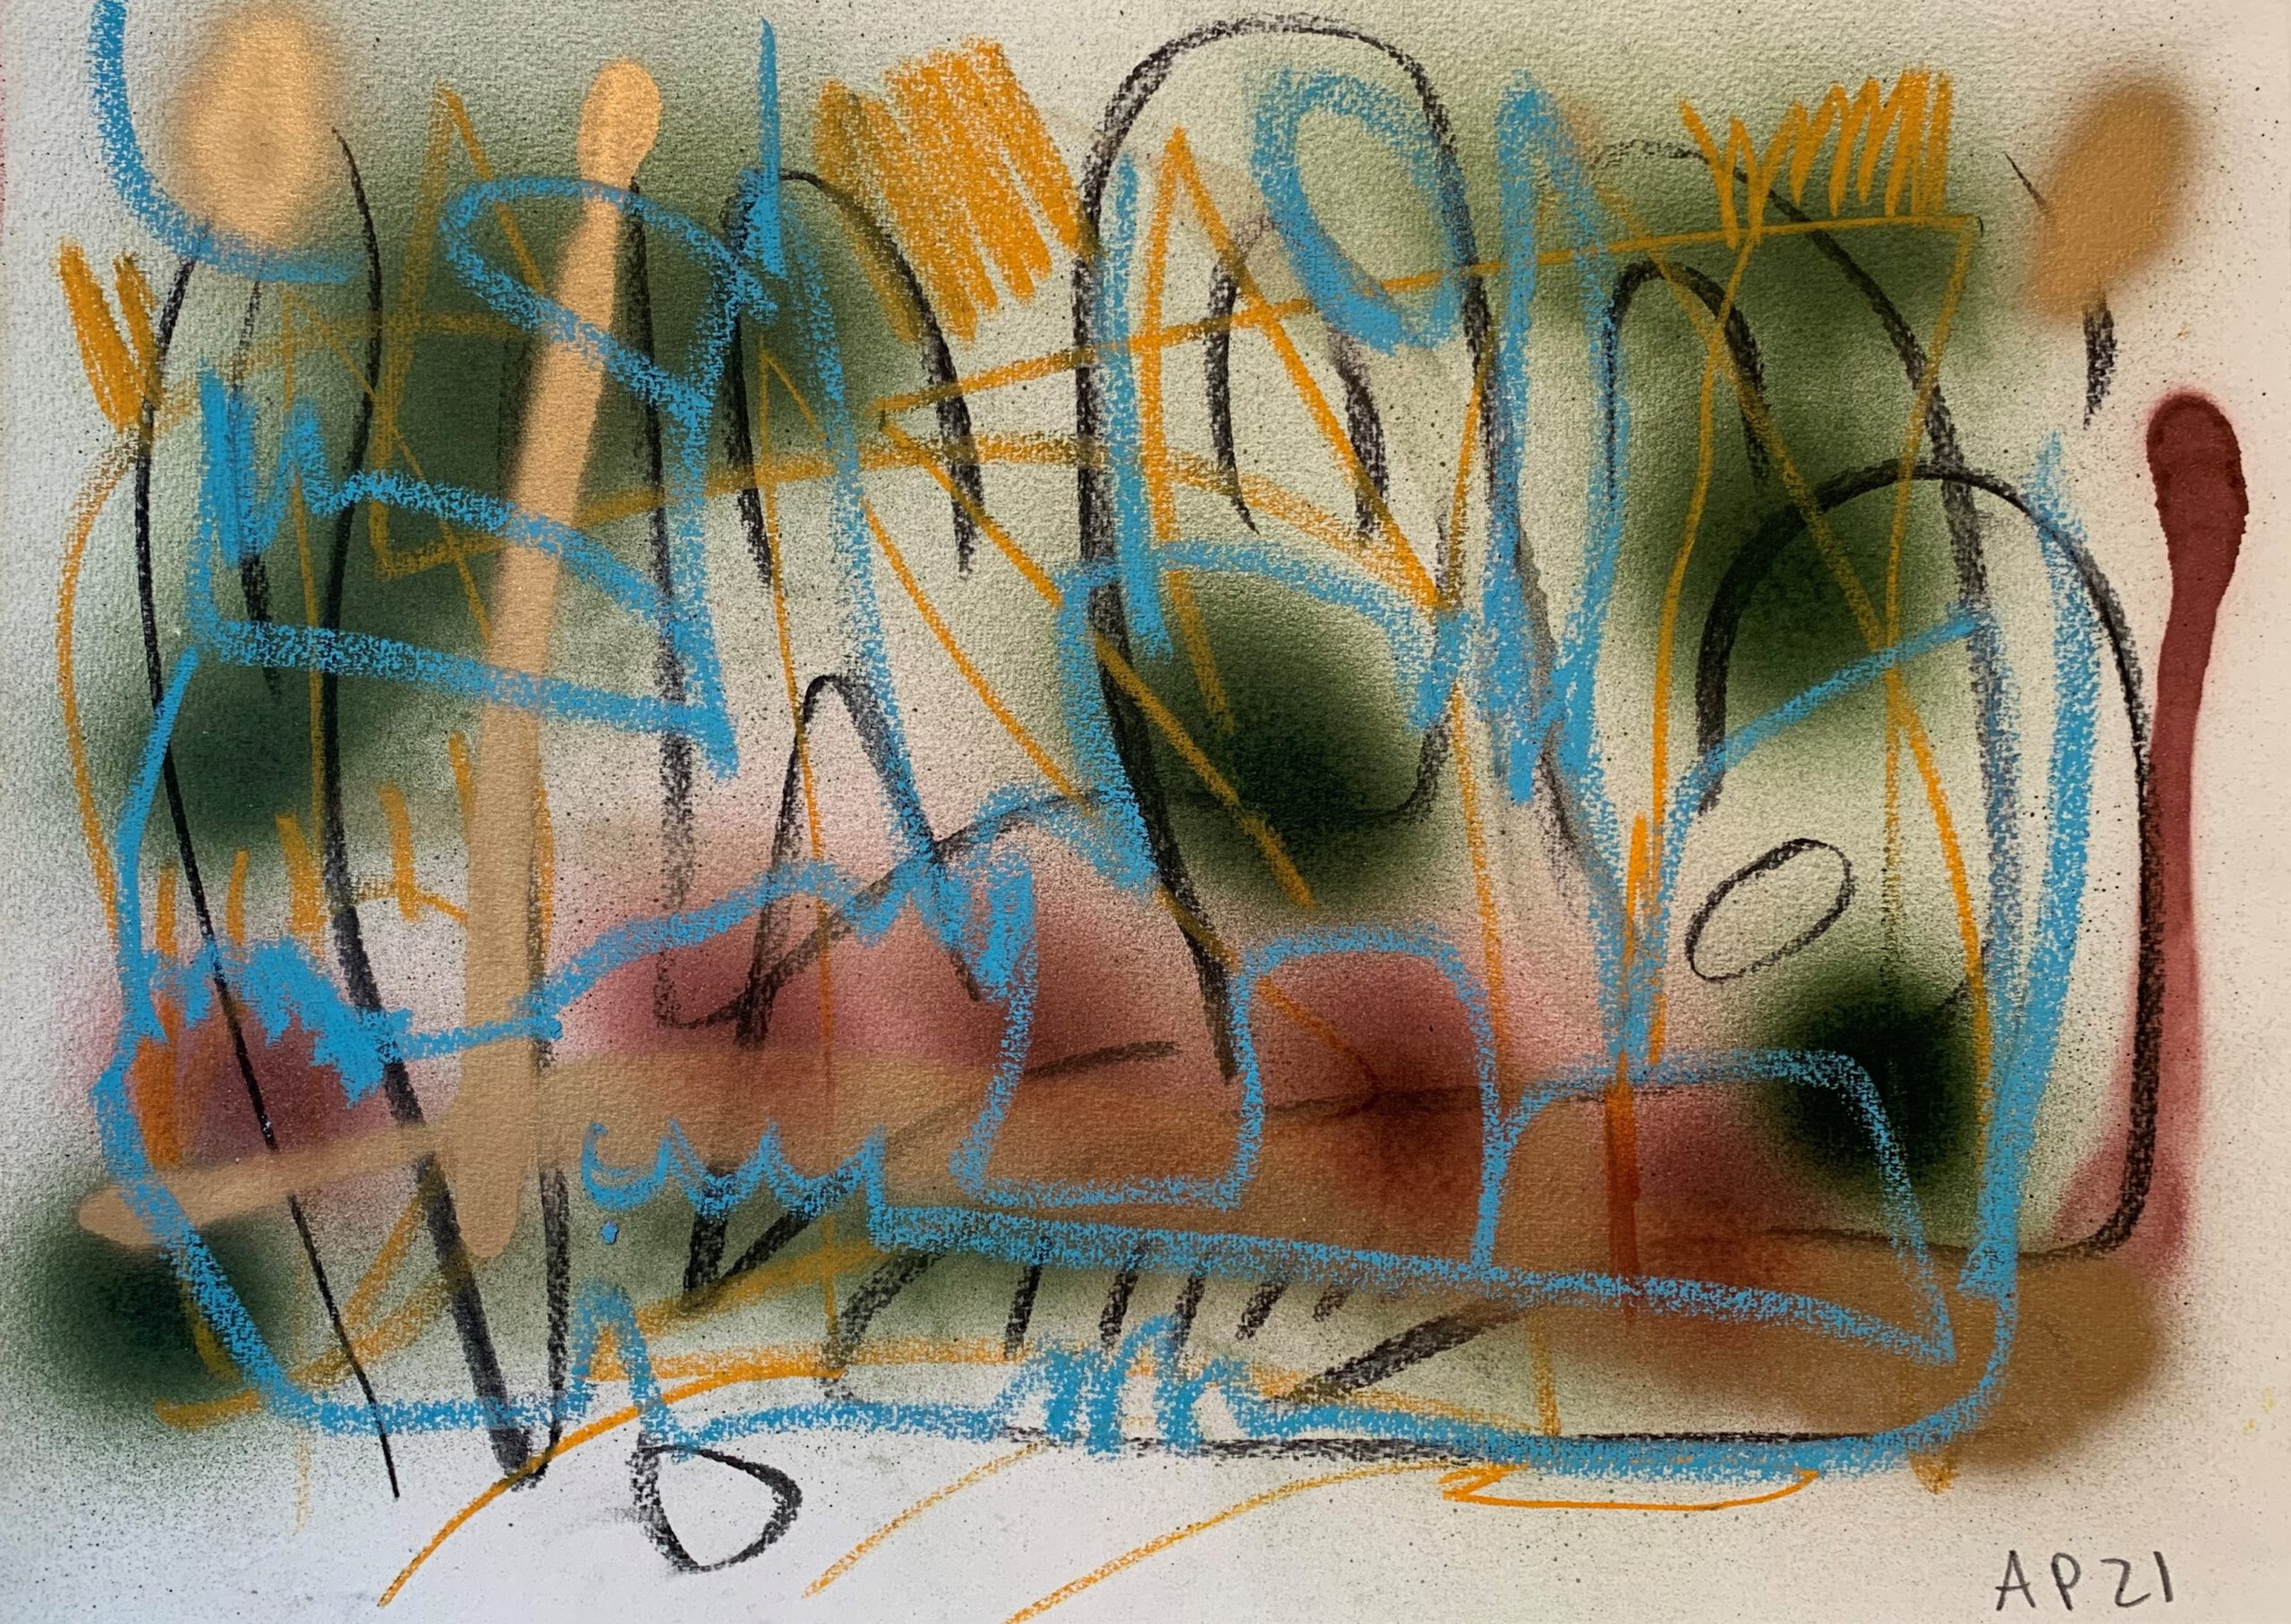 Poulet_Untitled 9 (Walk) pastel and spray paint on paper_ 30 x 42cm (2)